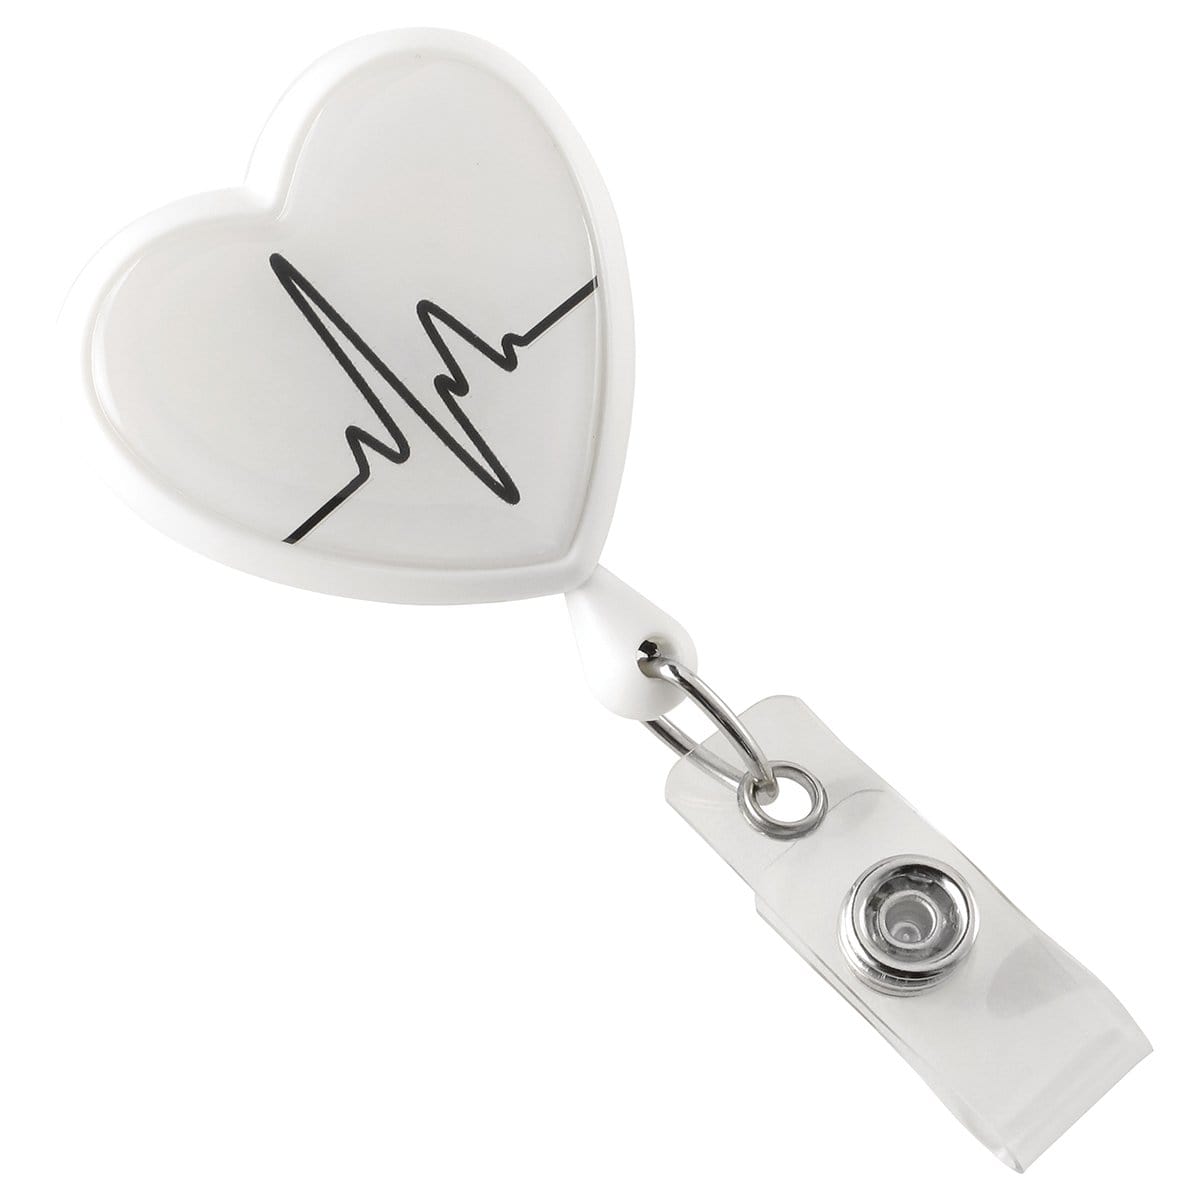 Heart Shaped EKG Themed Badge Reel with Swivel Spring Clip (P/N 2120-76XX)  and more Heart-Shaped Badge Reels at